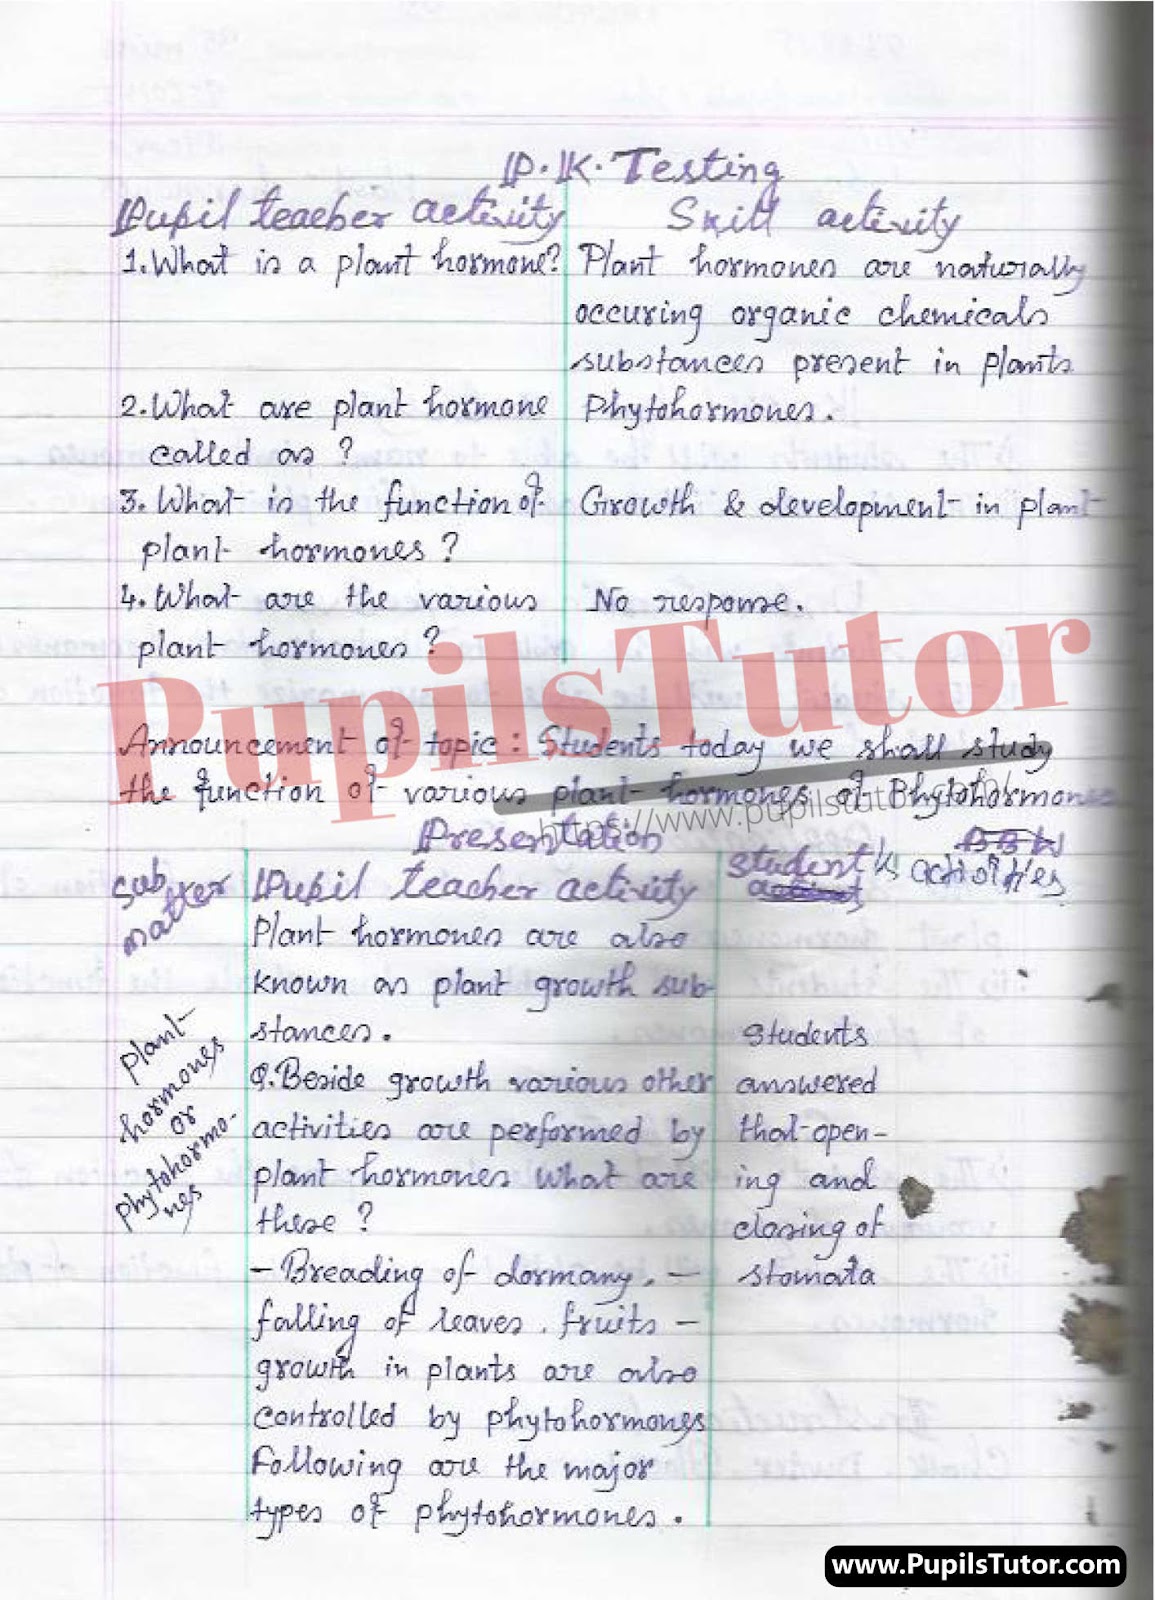 School Teaching Skill Plant Hormones Lesson Plan For B.Ed And Deled In English Free Download PDF And PPT (Power Point Presentation And Slides) – (Page And Image Number 2) – PupilsTutor